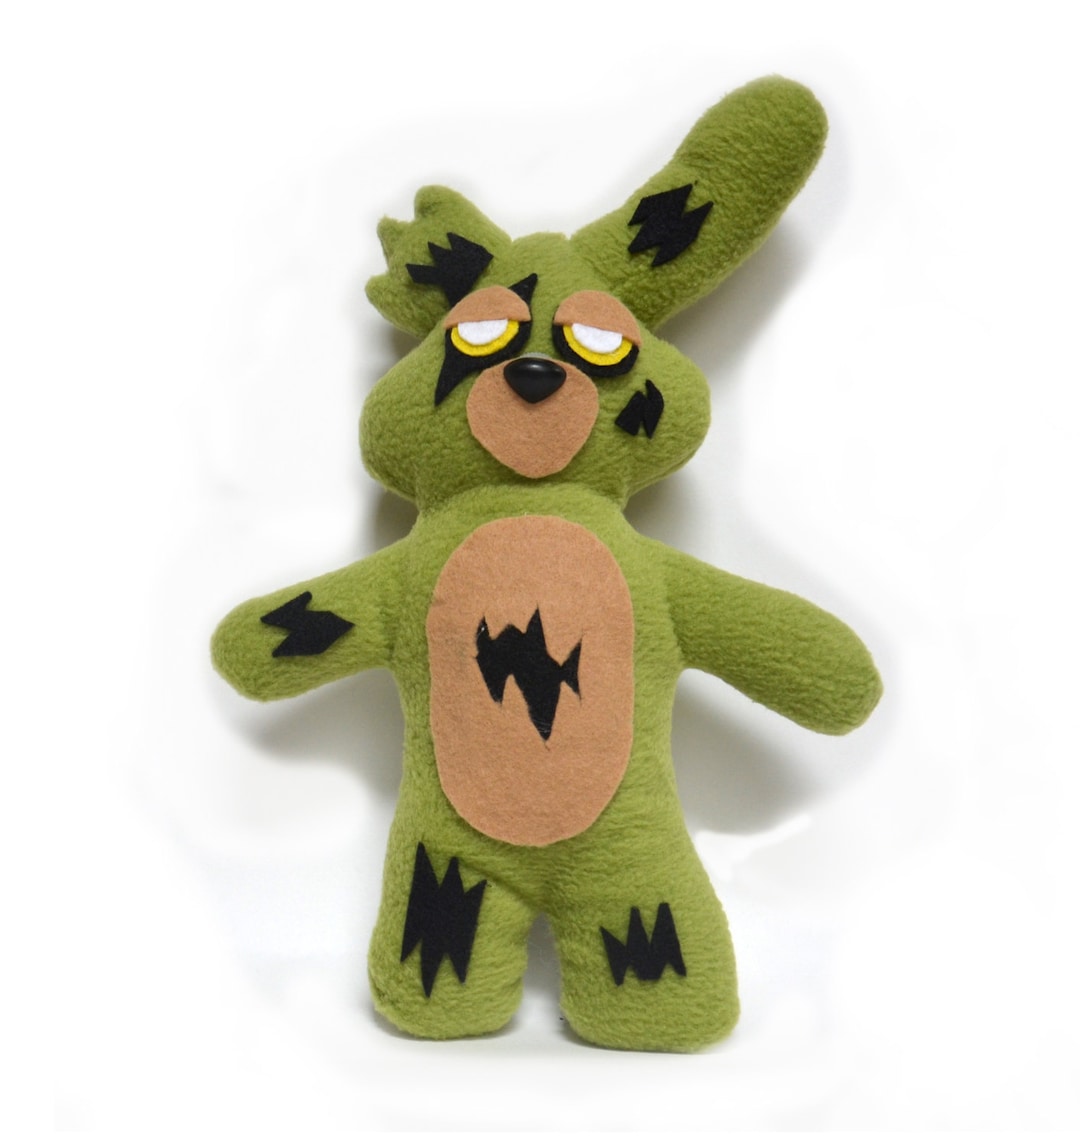 ADORABLE FNAF SPRINGTRAP And Chica Plush Doll Stuffed Toy For Home Decor  $14.77 - PicClick AU